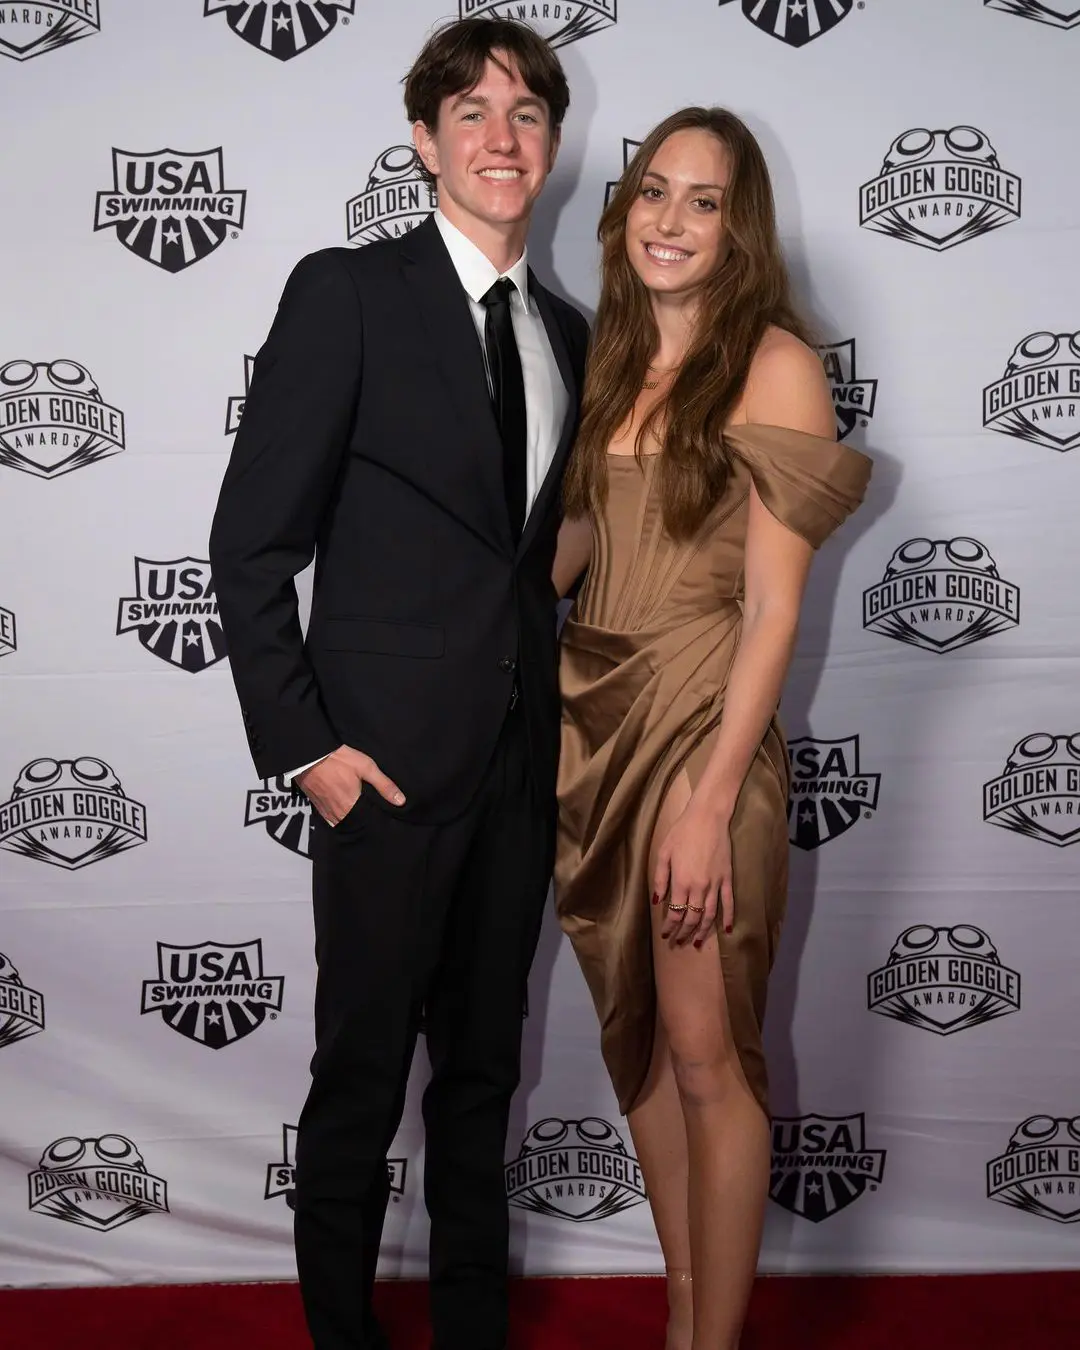 Jake thanked USA Swimming and its Foundation for that amazing night on December 9, 2021.